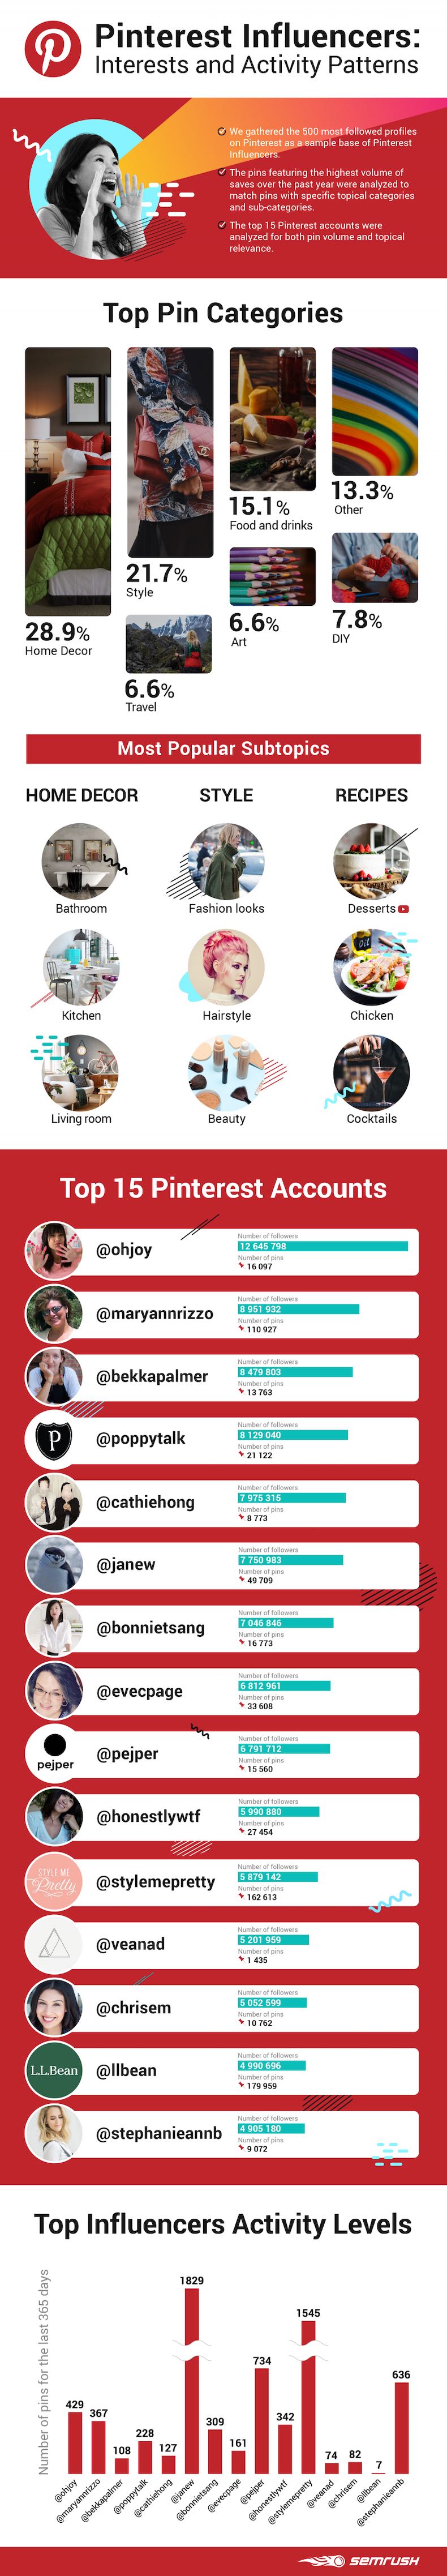 Pinterest Influencers 2019 Interests and activity patterns